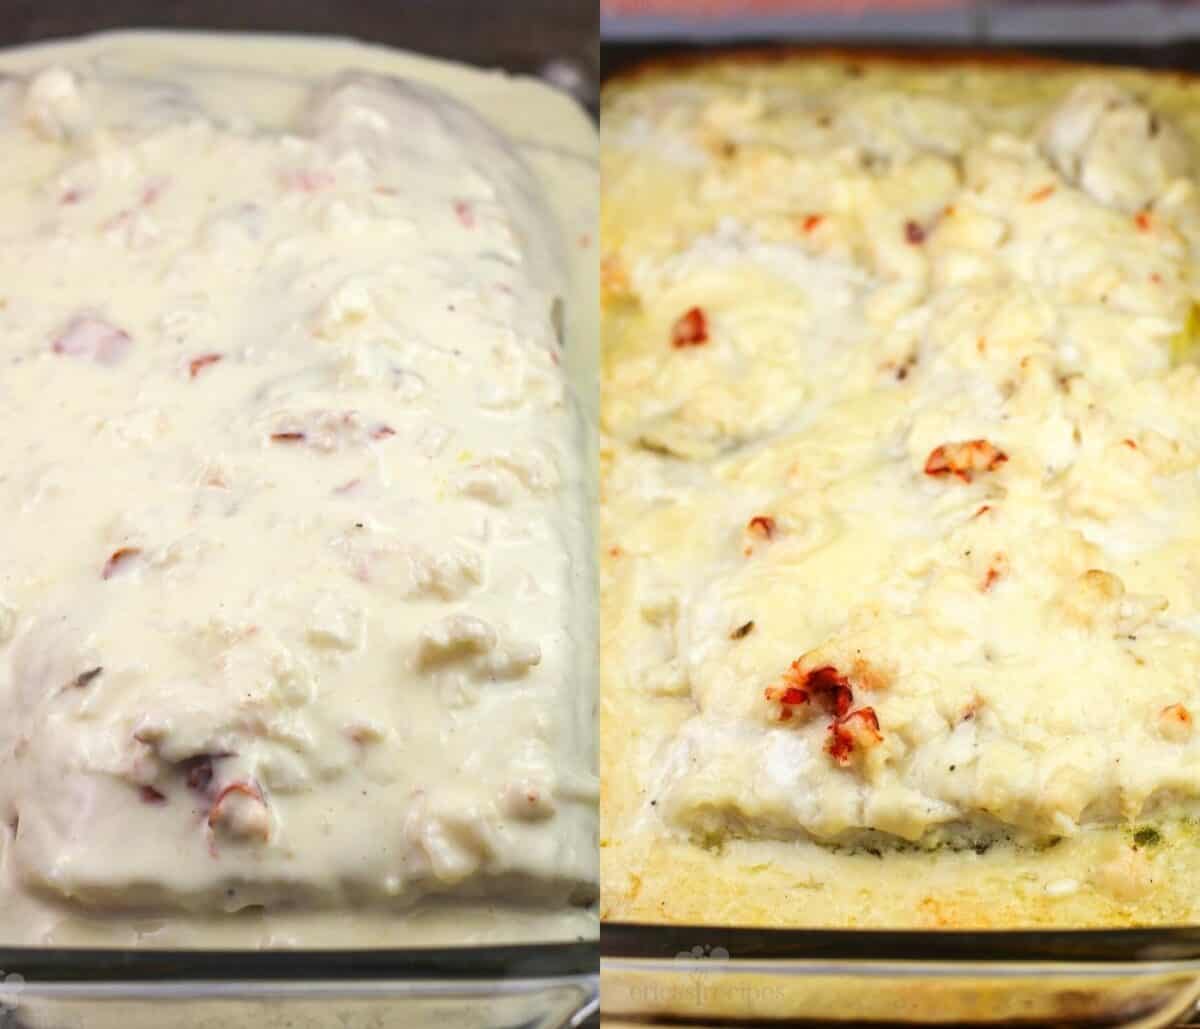 collage of 2 photos: left, raw haddock topped with sauce; cooked haddock and lobster sauce in clear bake dish